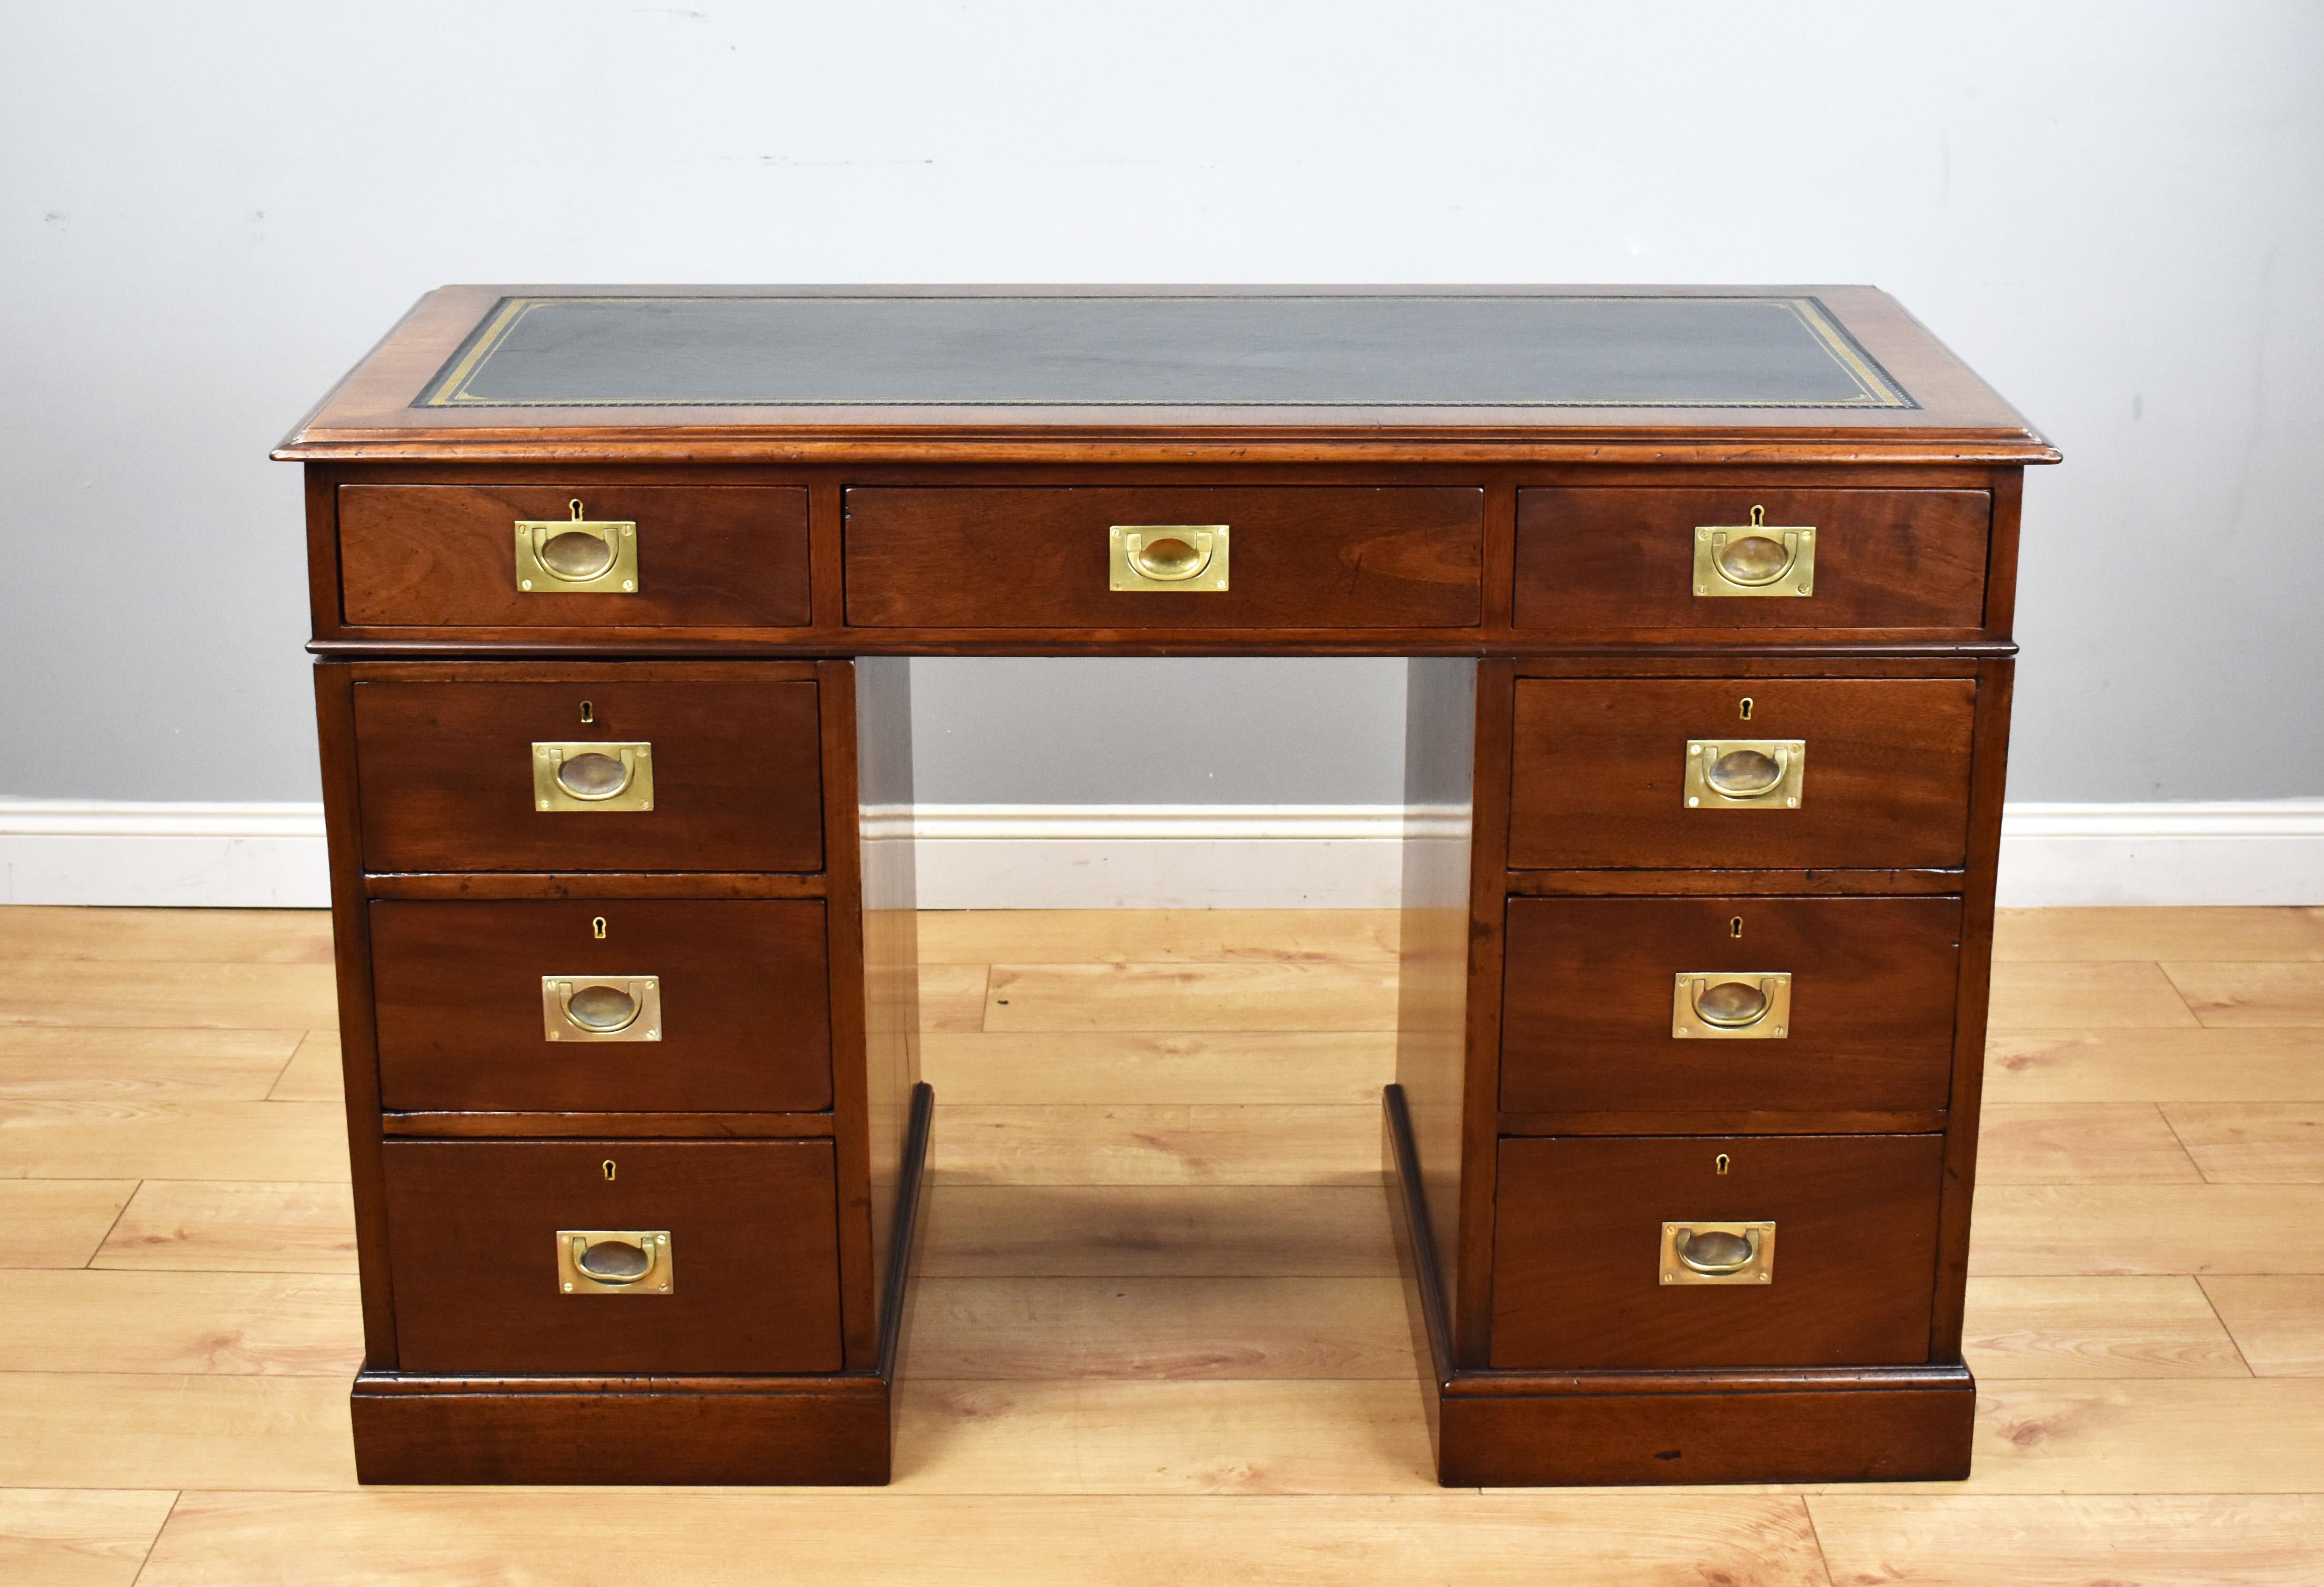 For sale is a good quality antique Campaign style mahogany pedestal desk, the top having an inset black leather skiver, decorated with gold tooling, above three drawers, each with brass Campaign handles. The top fits onto two pedestals, each with